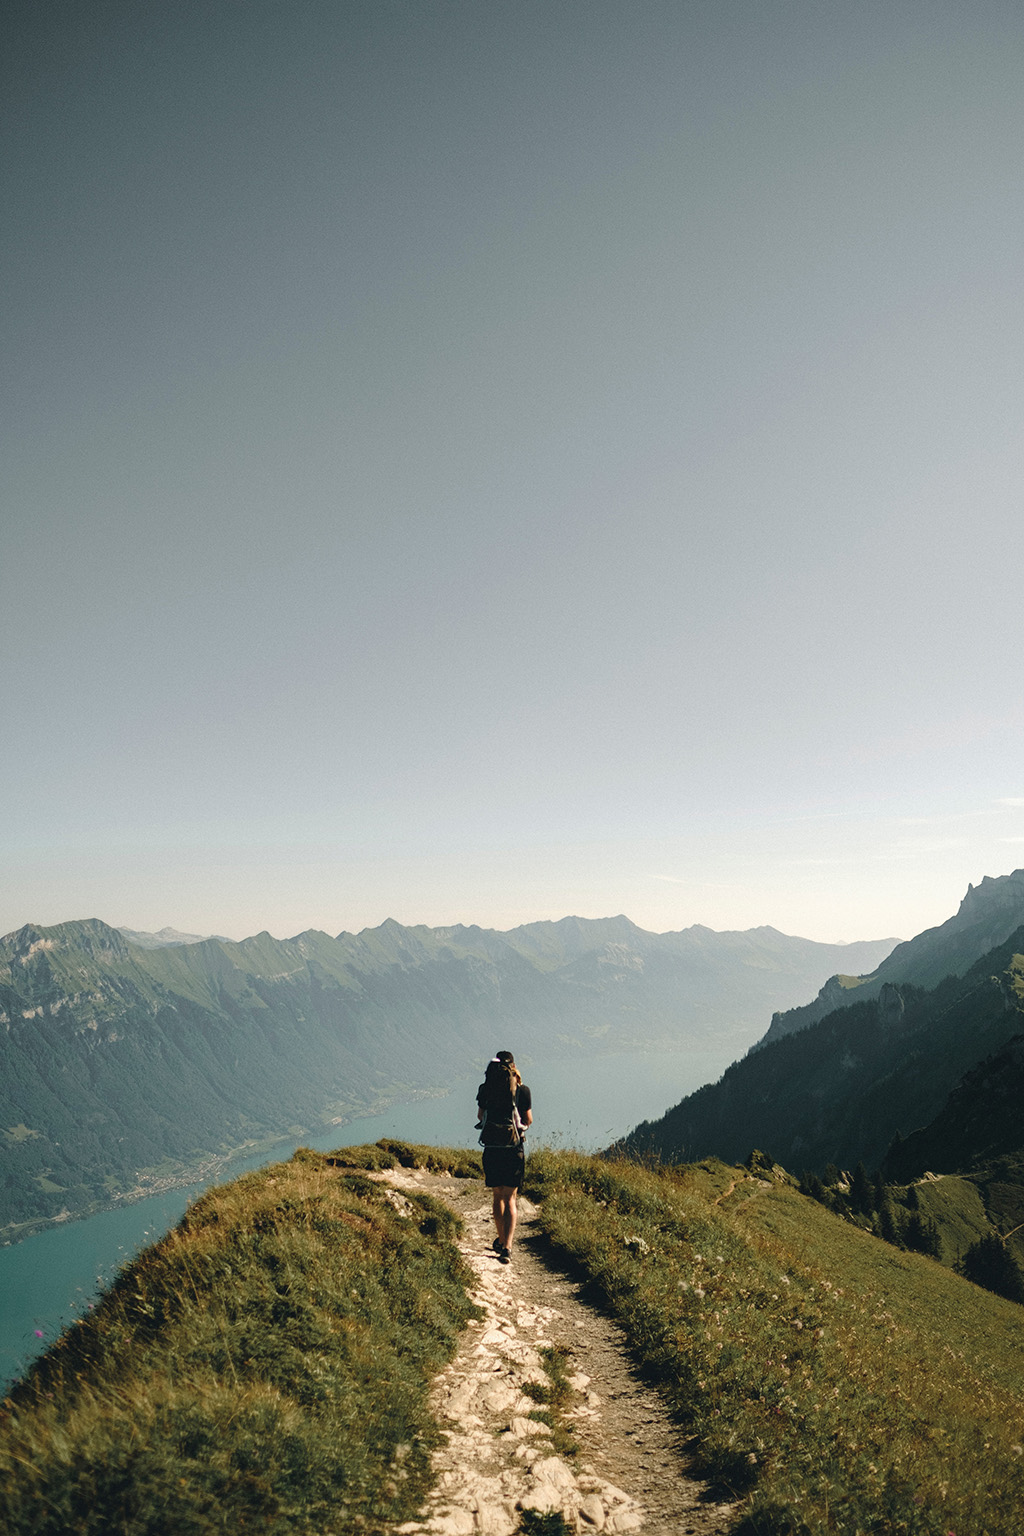 Get Over Your Fears! Tips For Hiking Alone